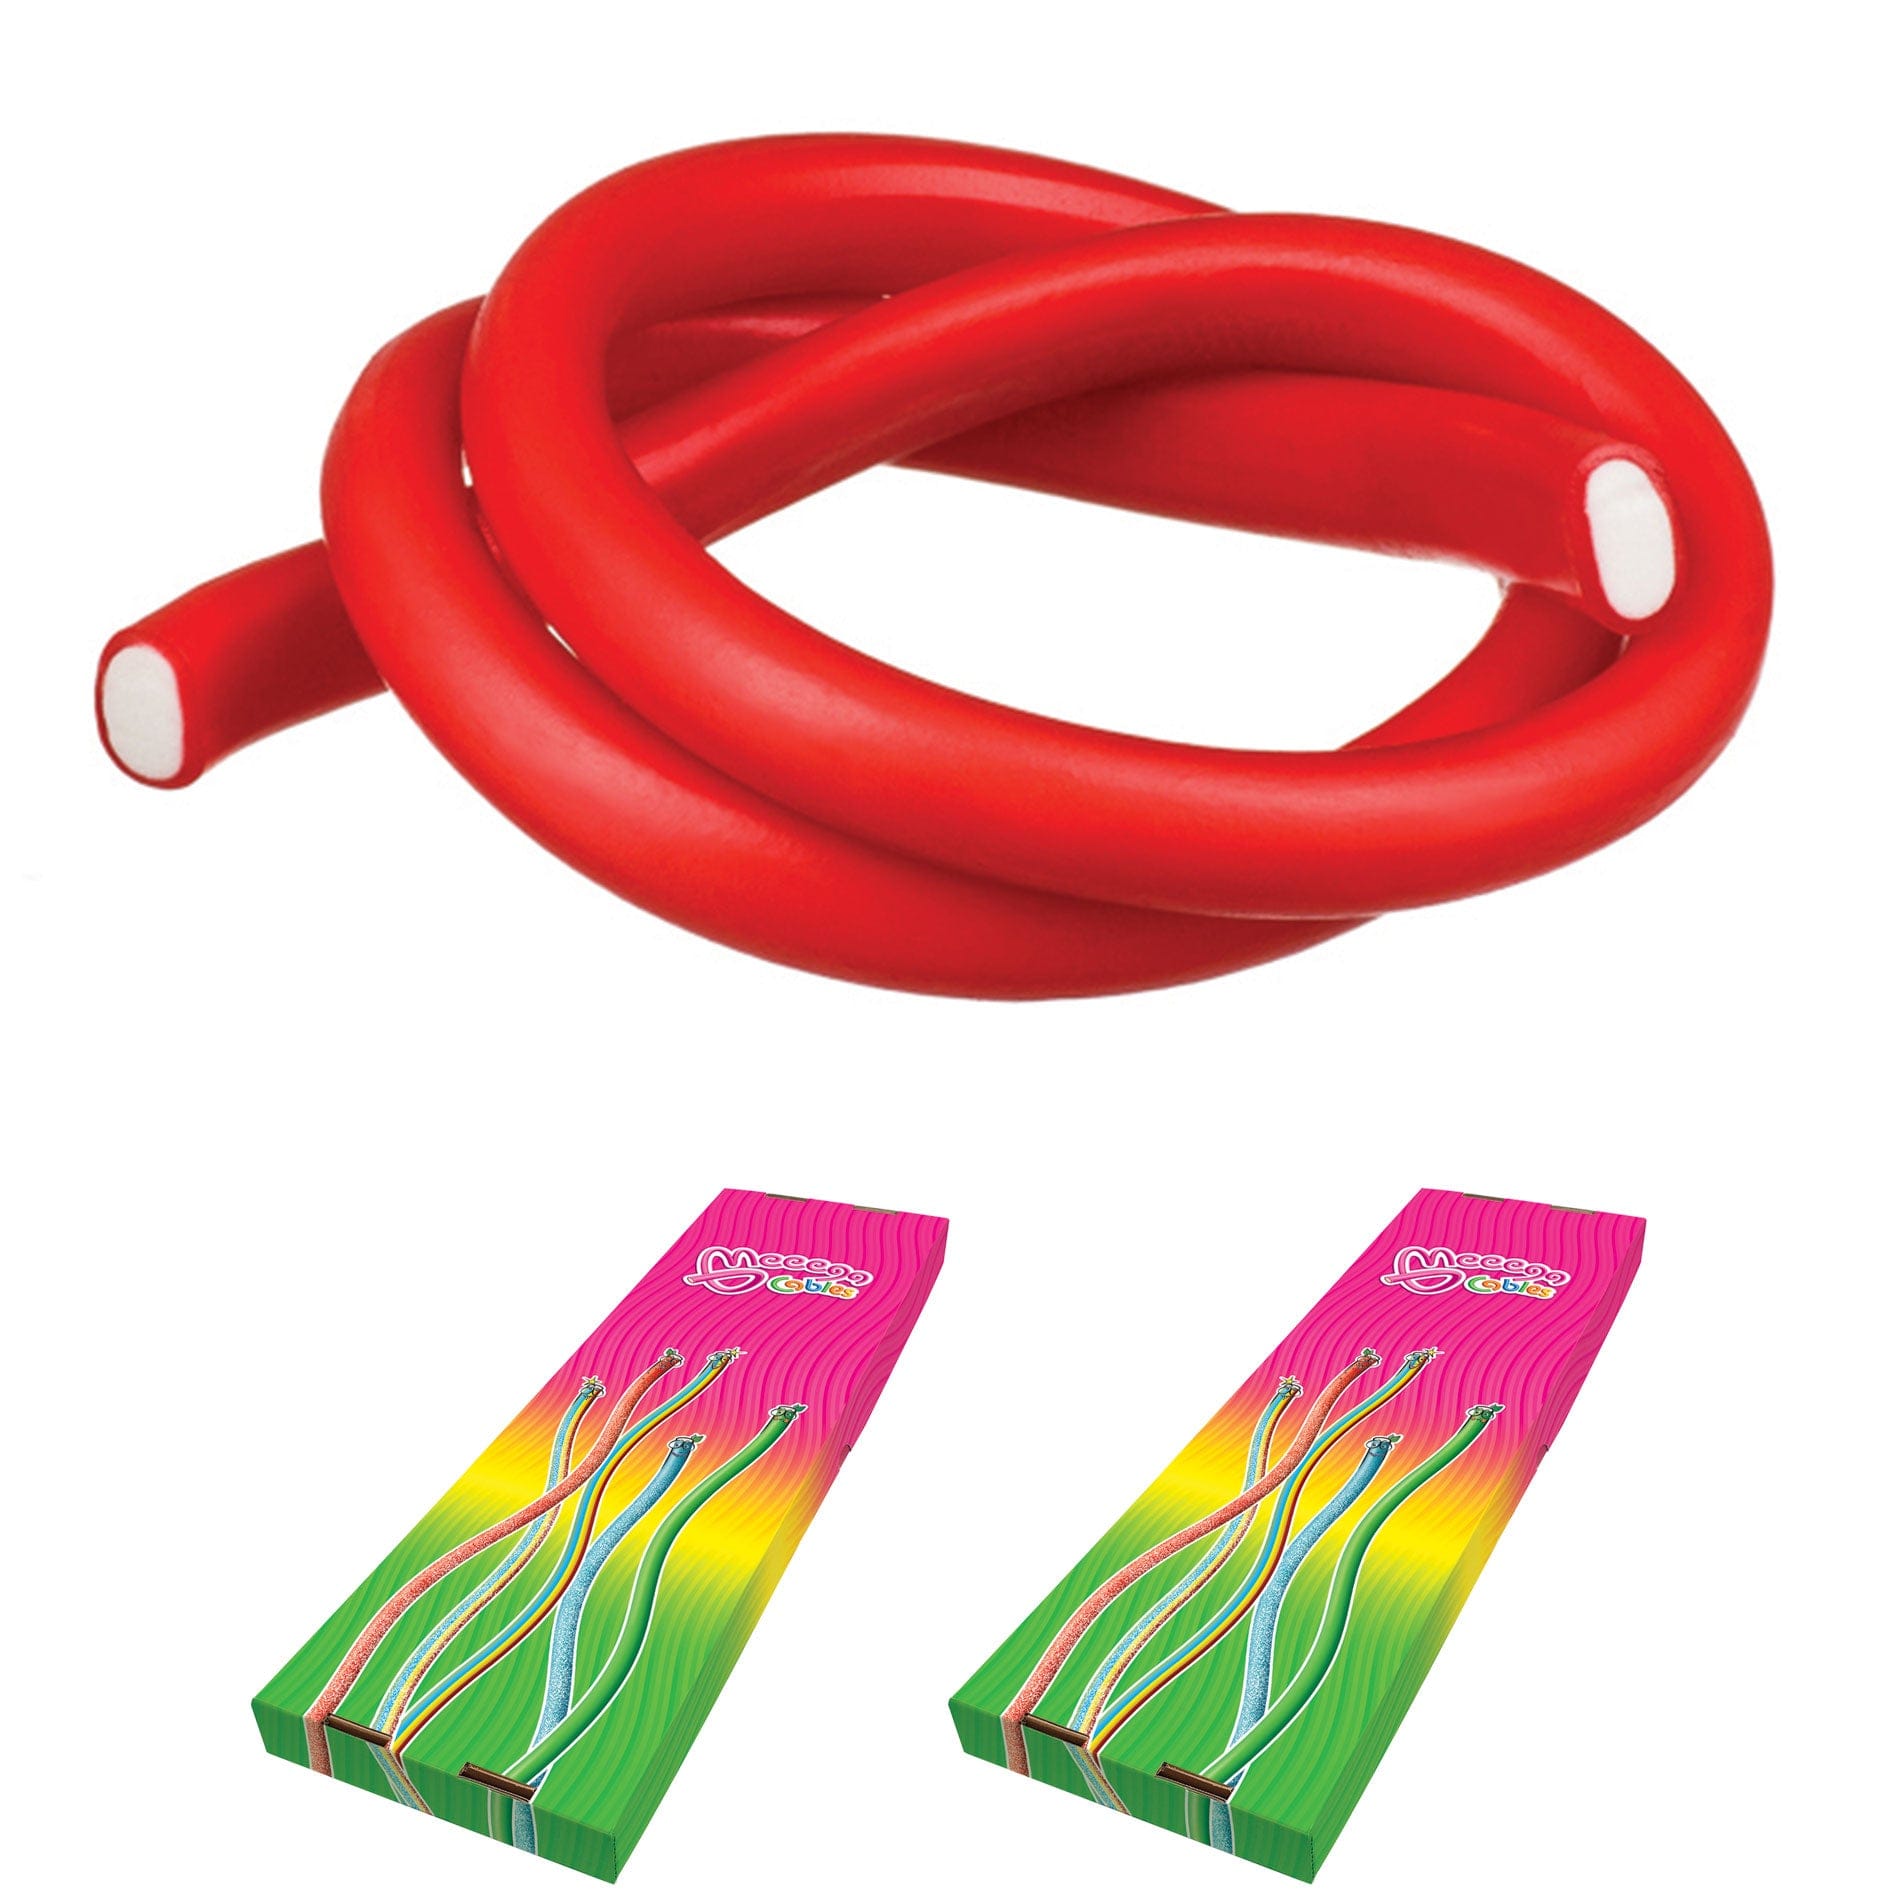 Novelty Concessions Gummy Rope STRAWBERRY / 2 Pack (60 pieces) Meeega Cables European Chewy Rope Candy - Box of 30 individually wrapped Meeega Cables, each over 2-feet long cups with lids and straws